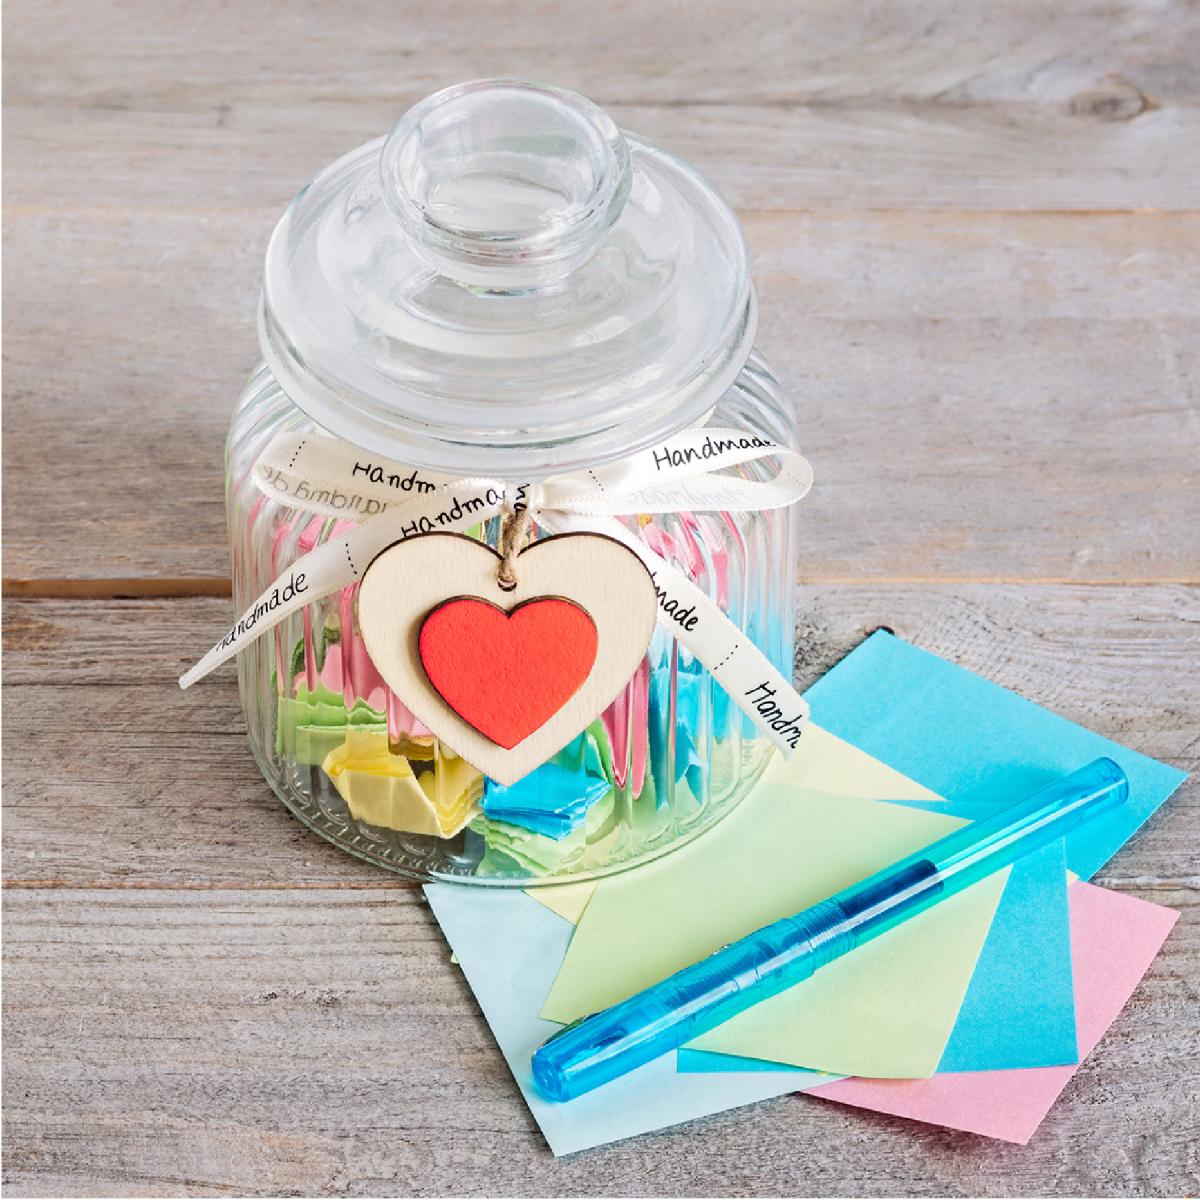 A jar filled with colorful notes